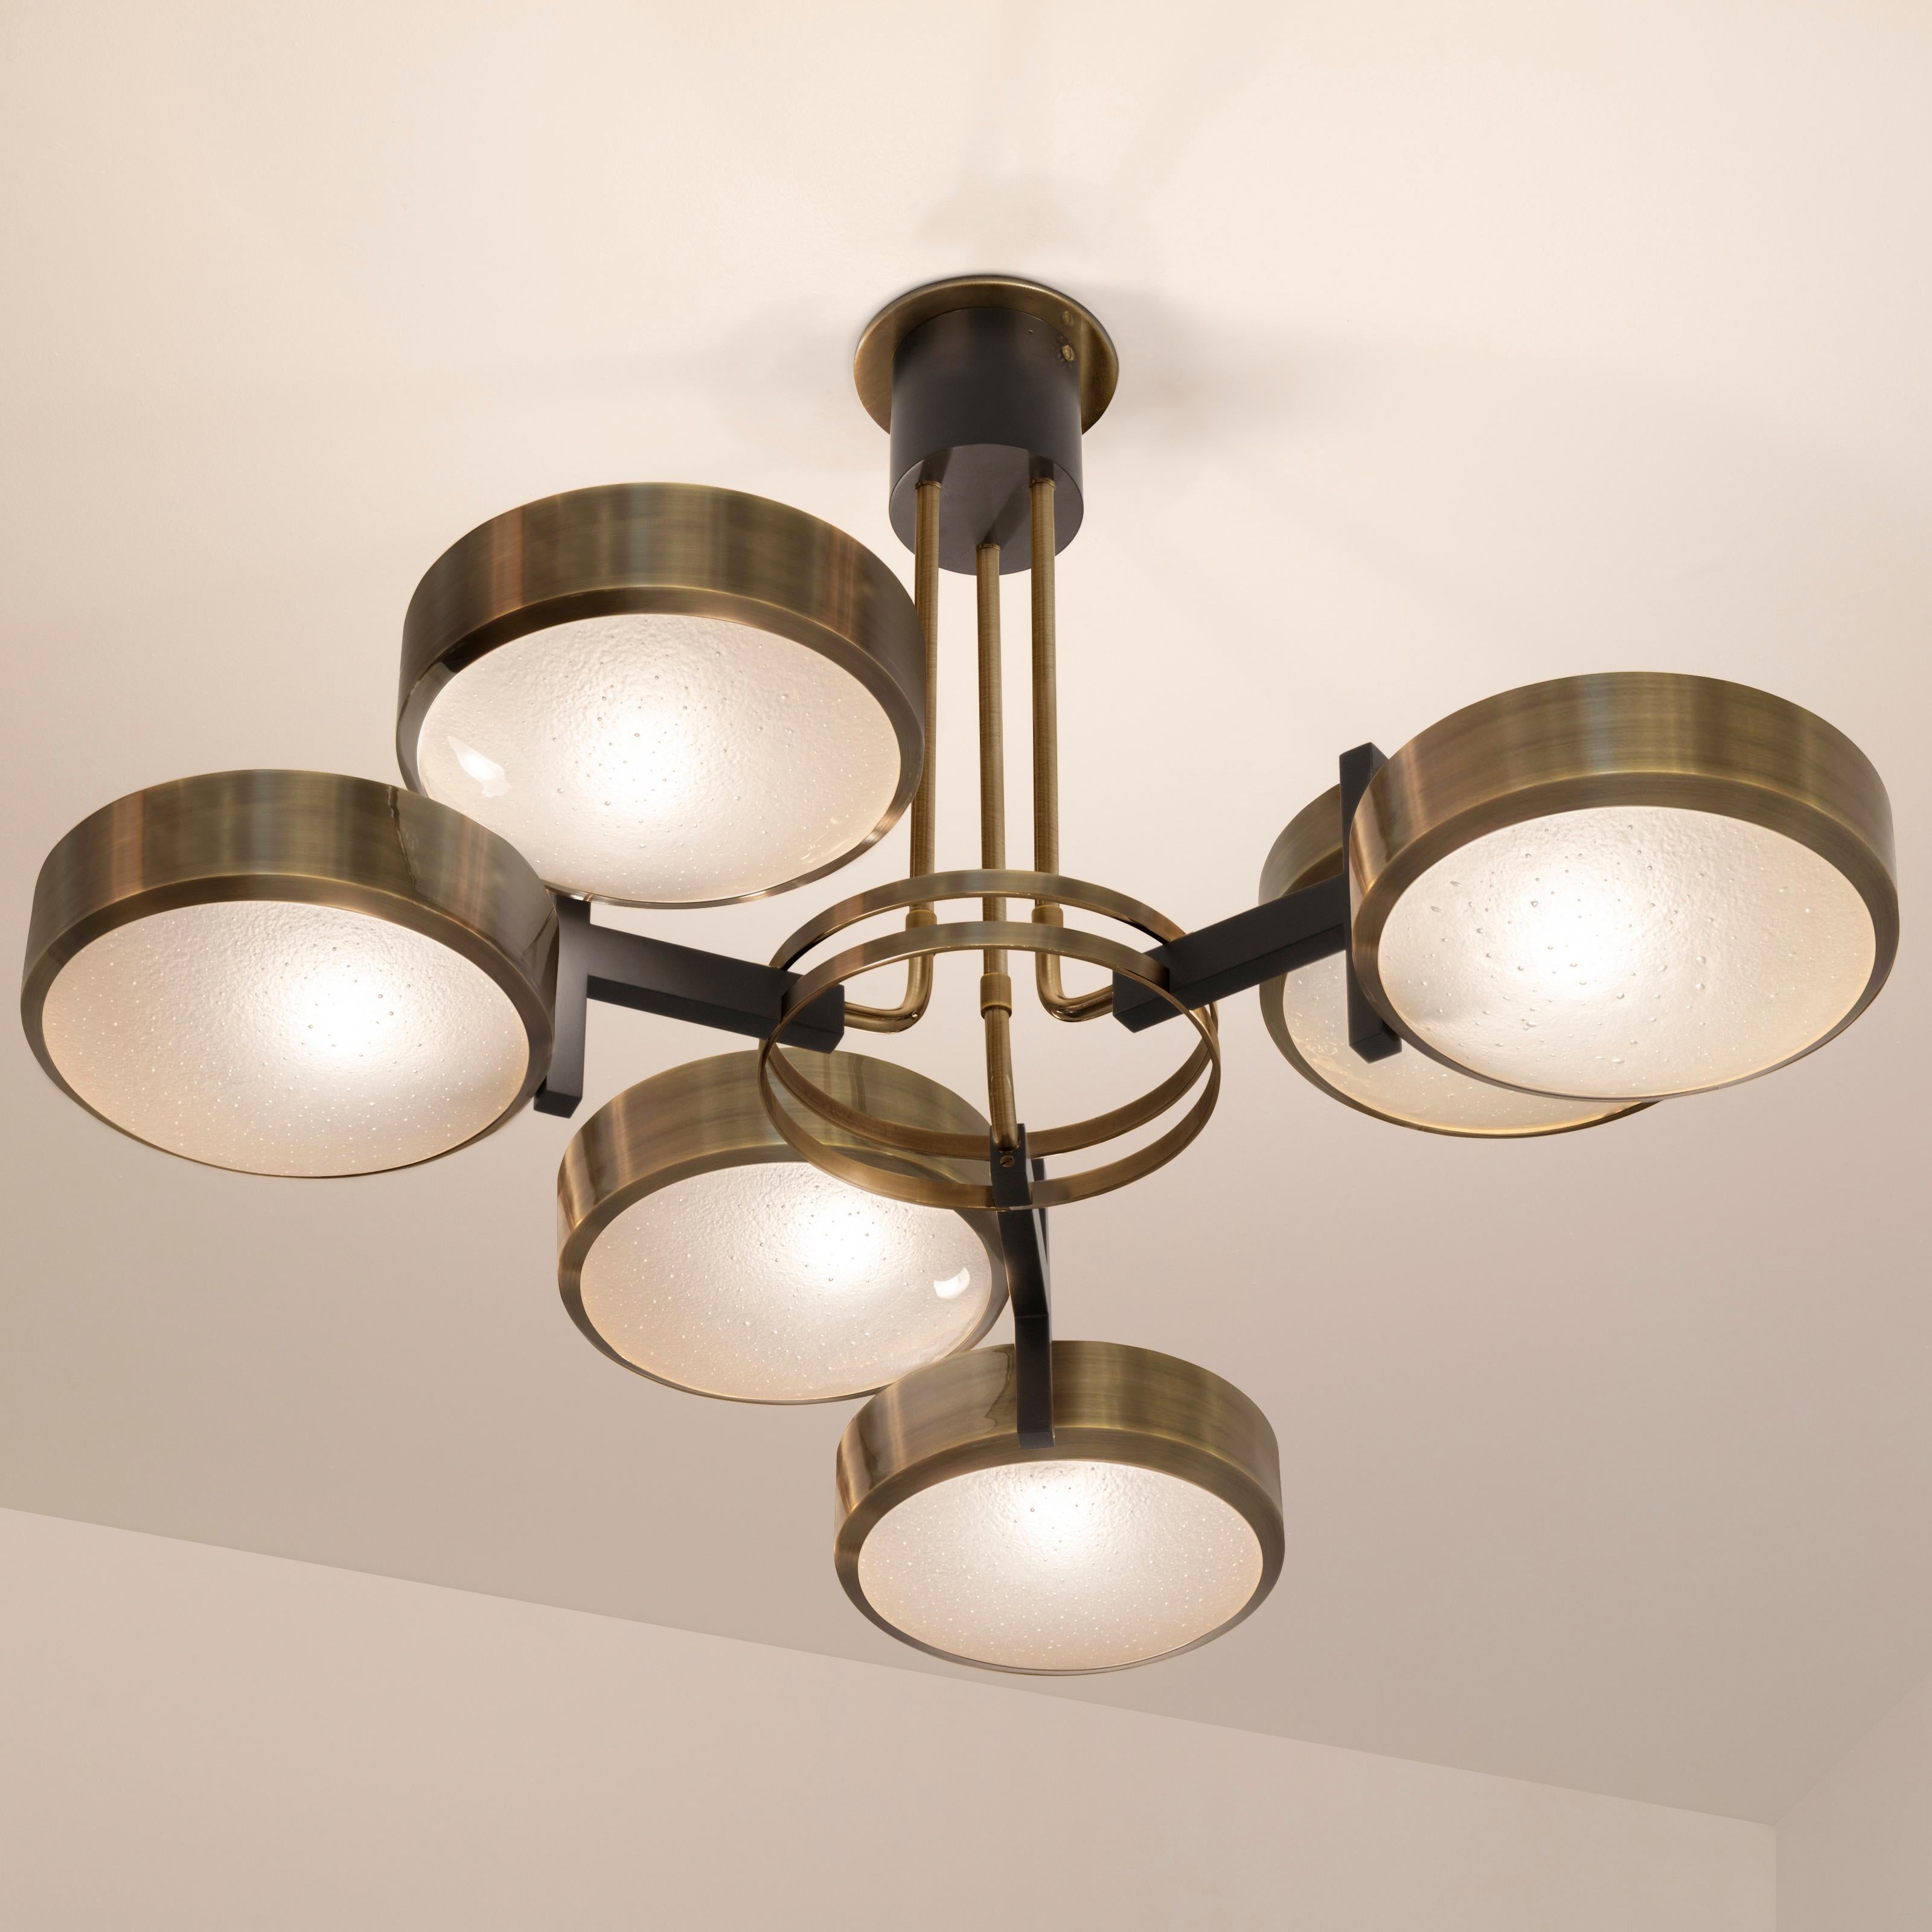 The Eclissi ceiling light is designed around three pairs of eclipsing shades bound by a series of brass rings and a distinctive triple stem. The first images show the fixture in our Bronzo Ottone (Bronze) finish with black accents-subsequent